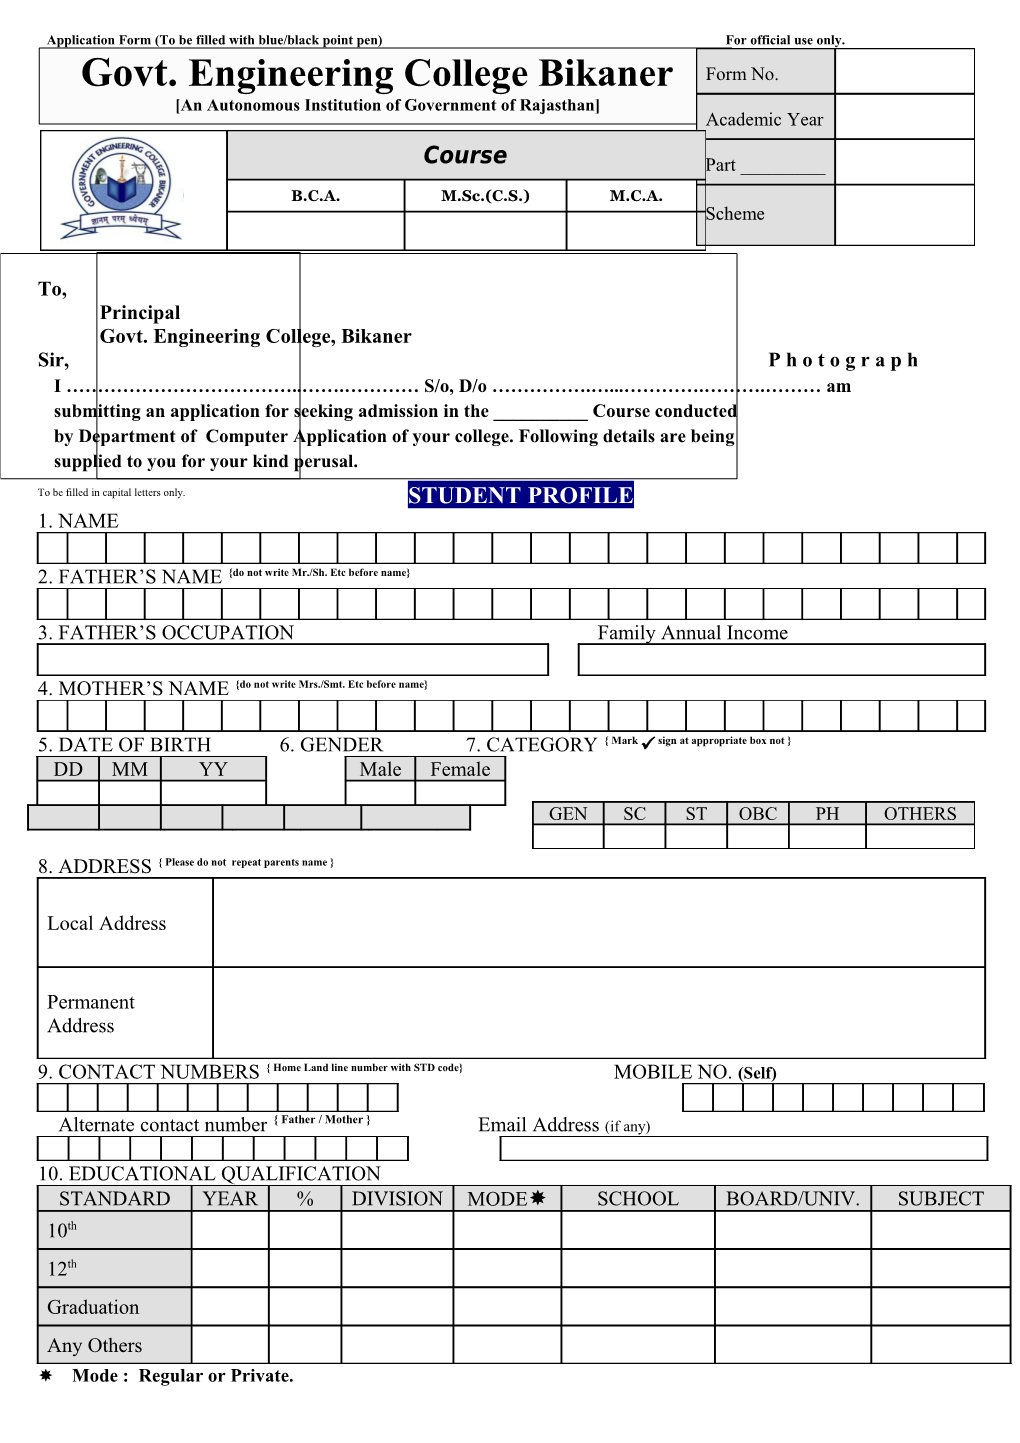 Application Form (To Be Filled with Blue/Black Point Pen)For Official Use Only